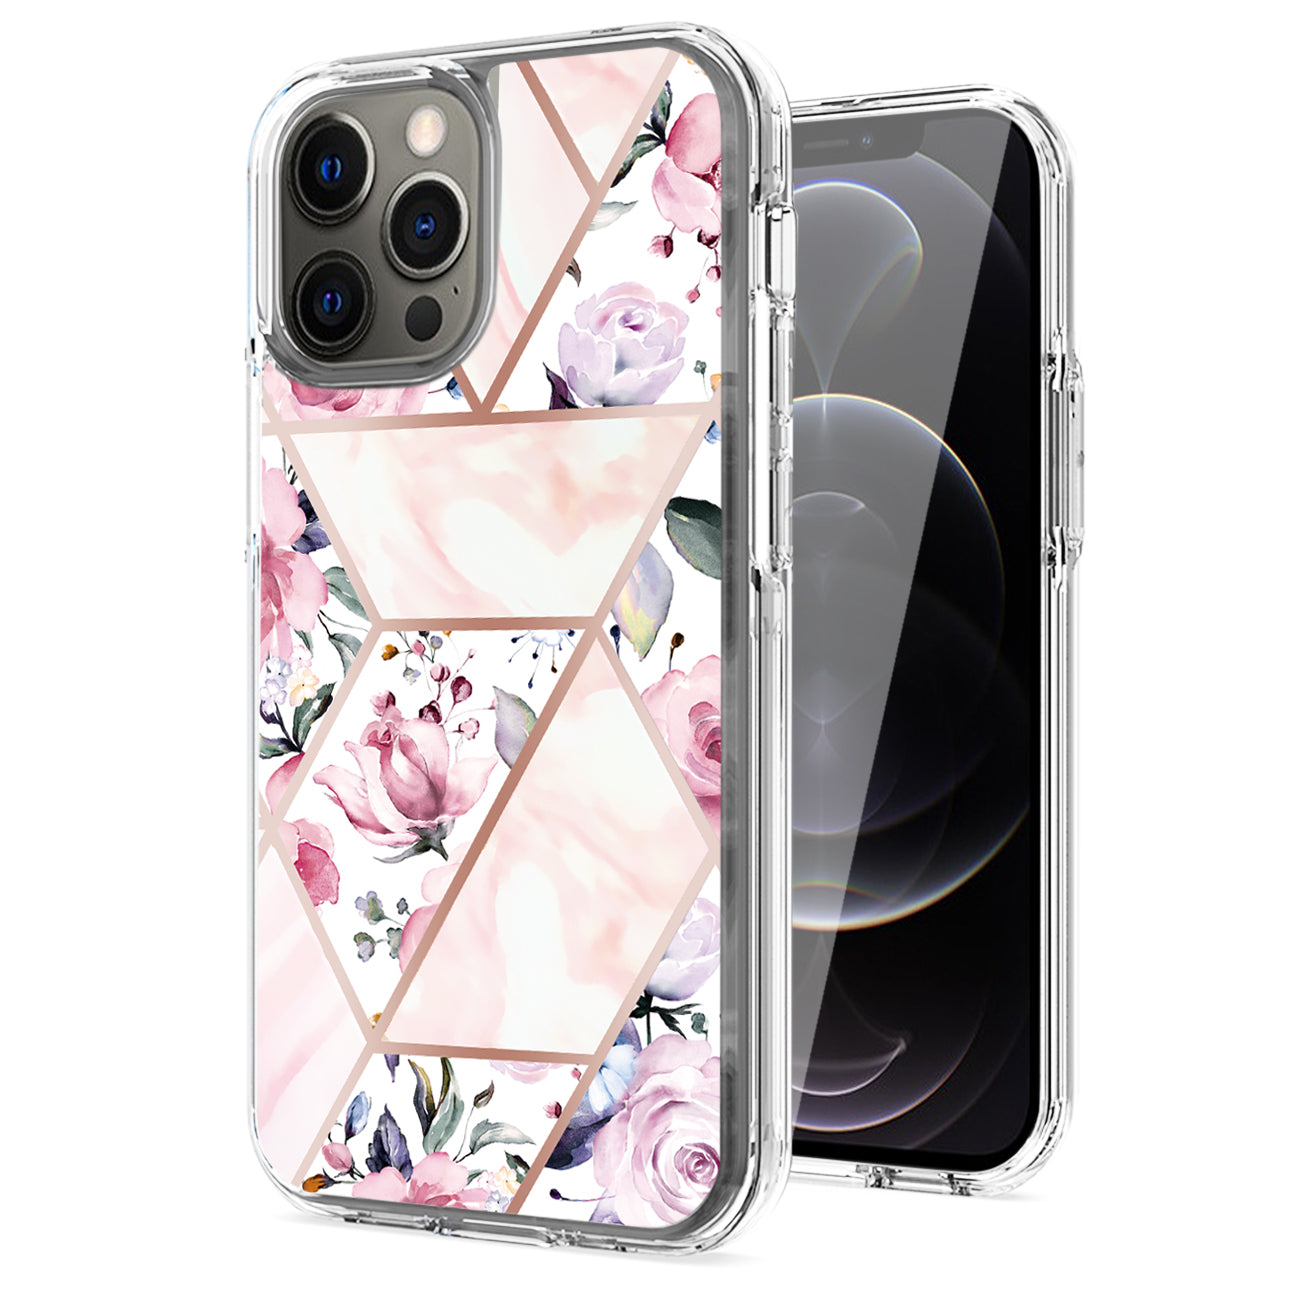 Flower Design Dual Layer Hybrid Hard & Soft TPU Case for IPH 12/IPH 12 PRO In Pink Base Flower